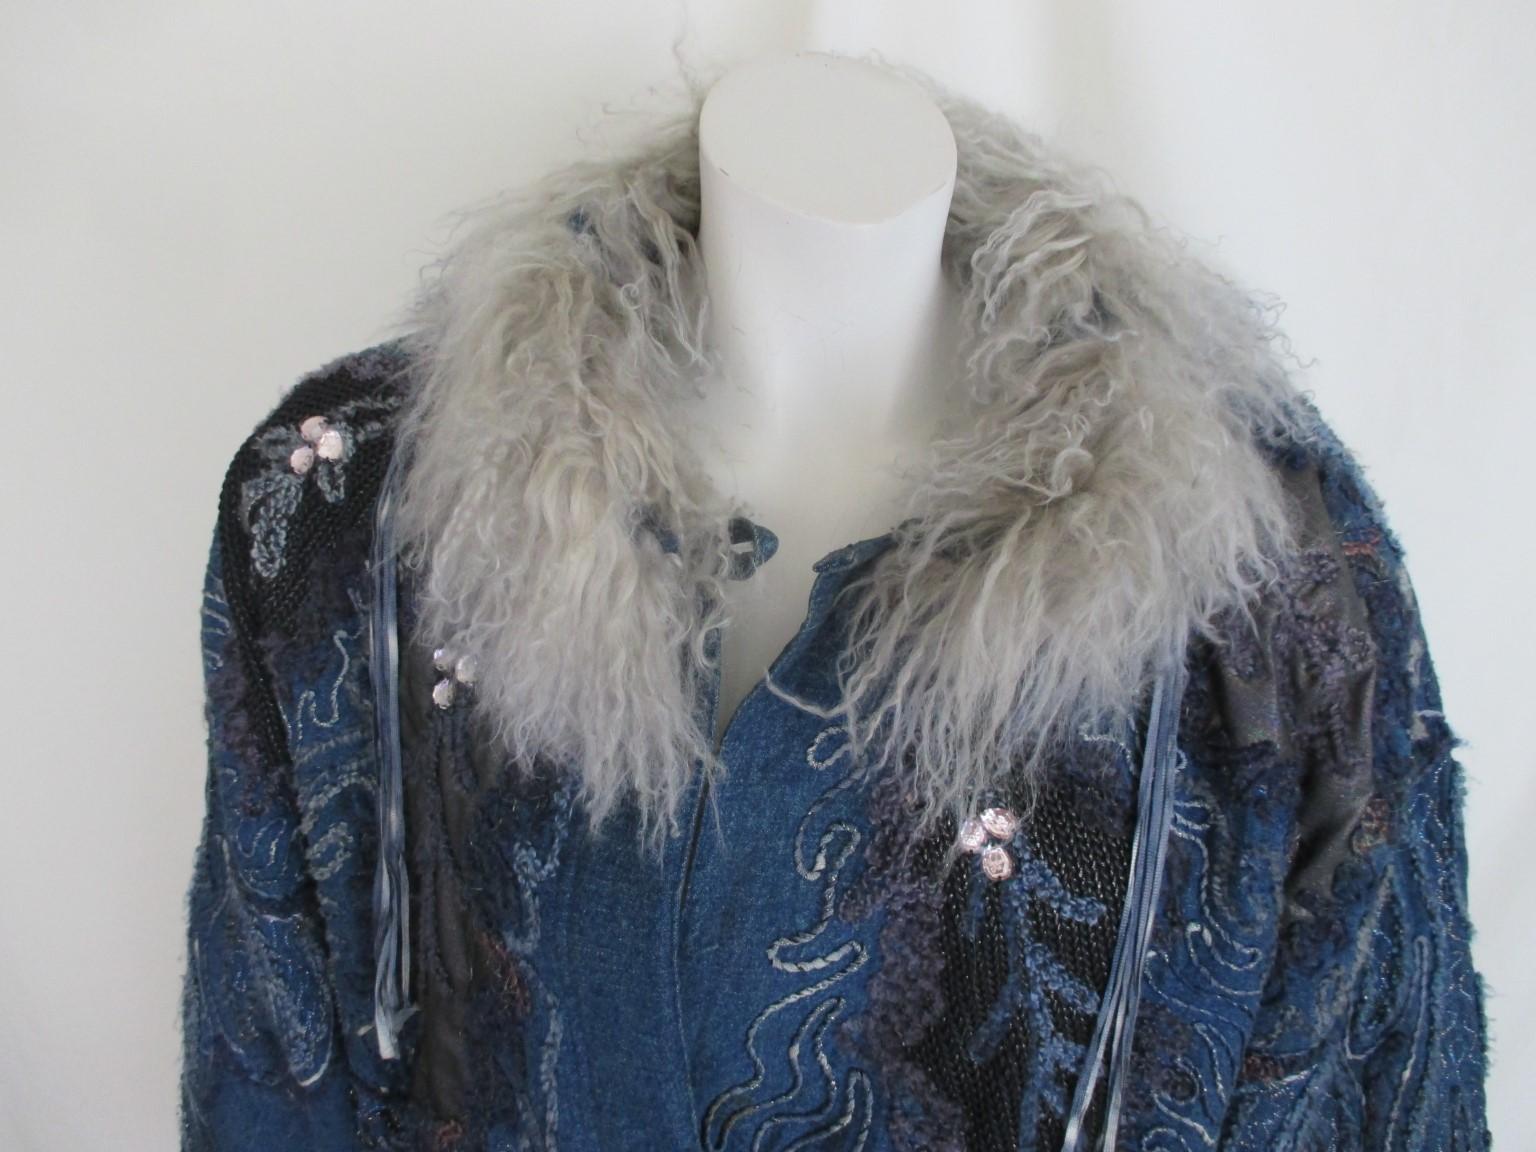 This vintage parka style embroidered jacket is made of blue denim 

We offer more exclusive vintage items, view our fronstore

Details:
With 2 side pockets, shoulderpads and 3 closing buttons.
Its handworked and embroidered with some rhine stones